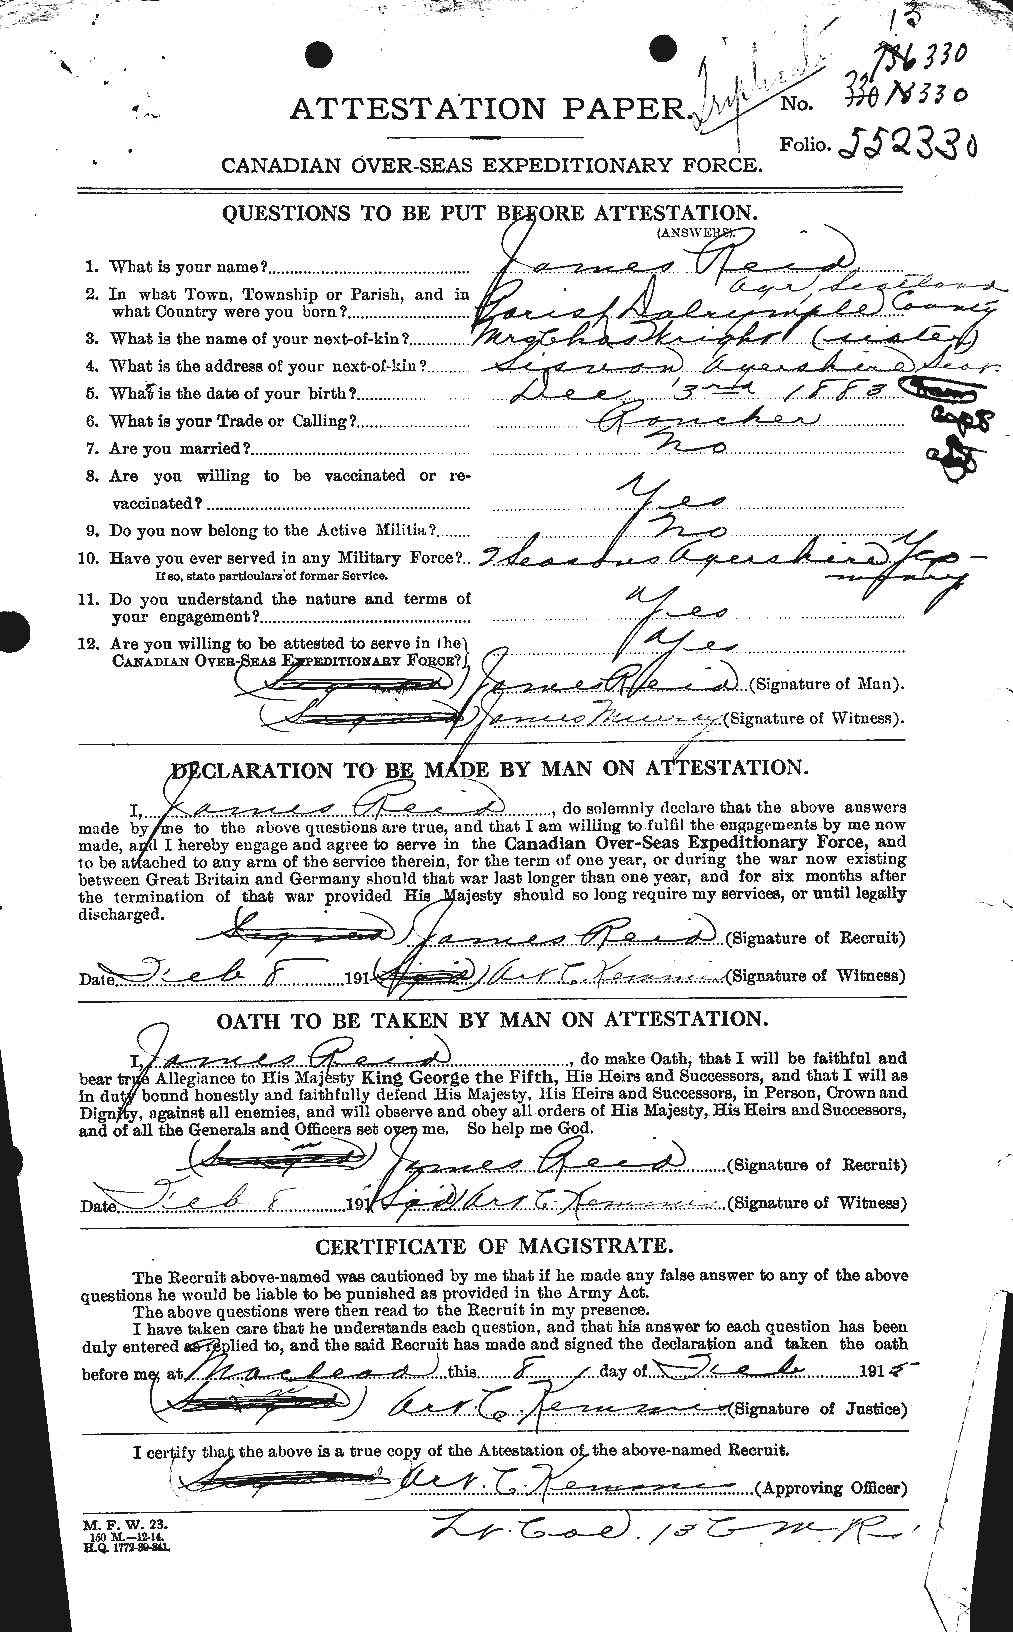 Personnel Records of the First World War - CEF 598675a